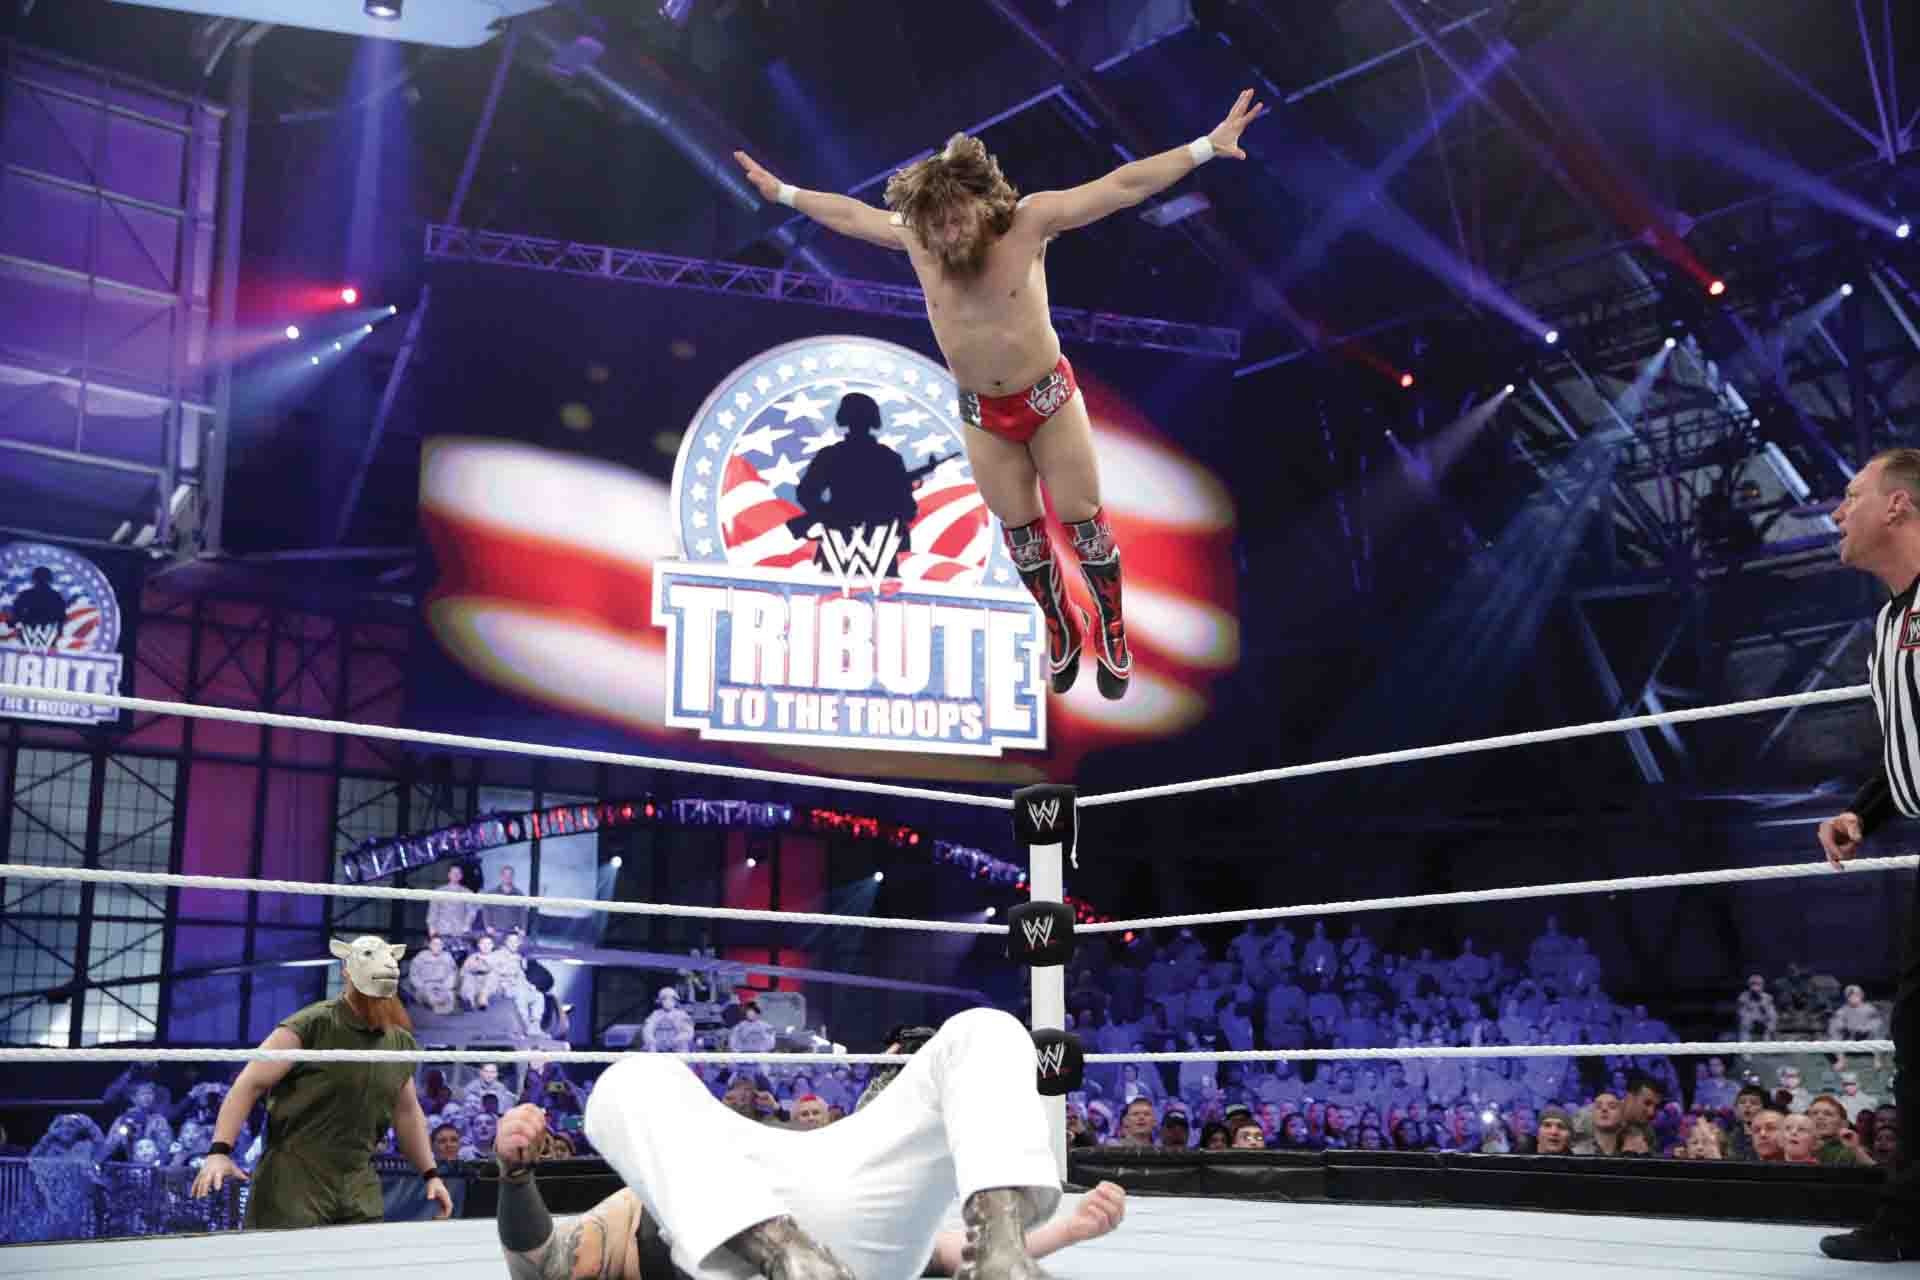 WWE ready to pay tribute 12th annual "Tribute to the Troops" to be